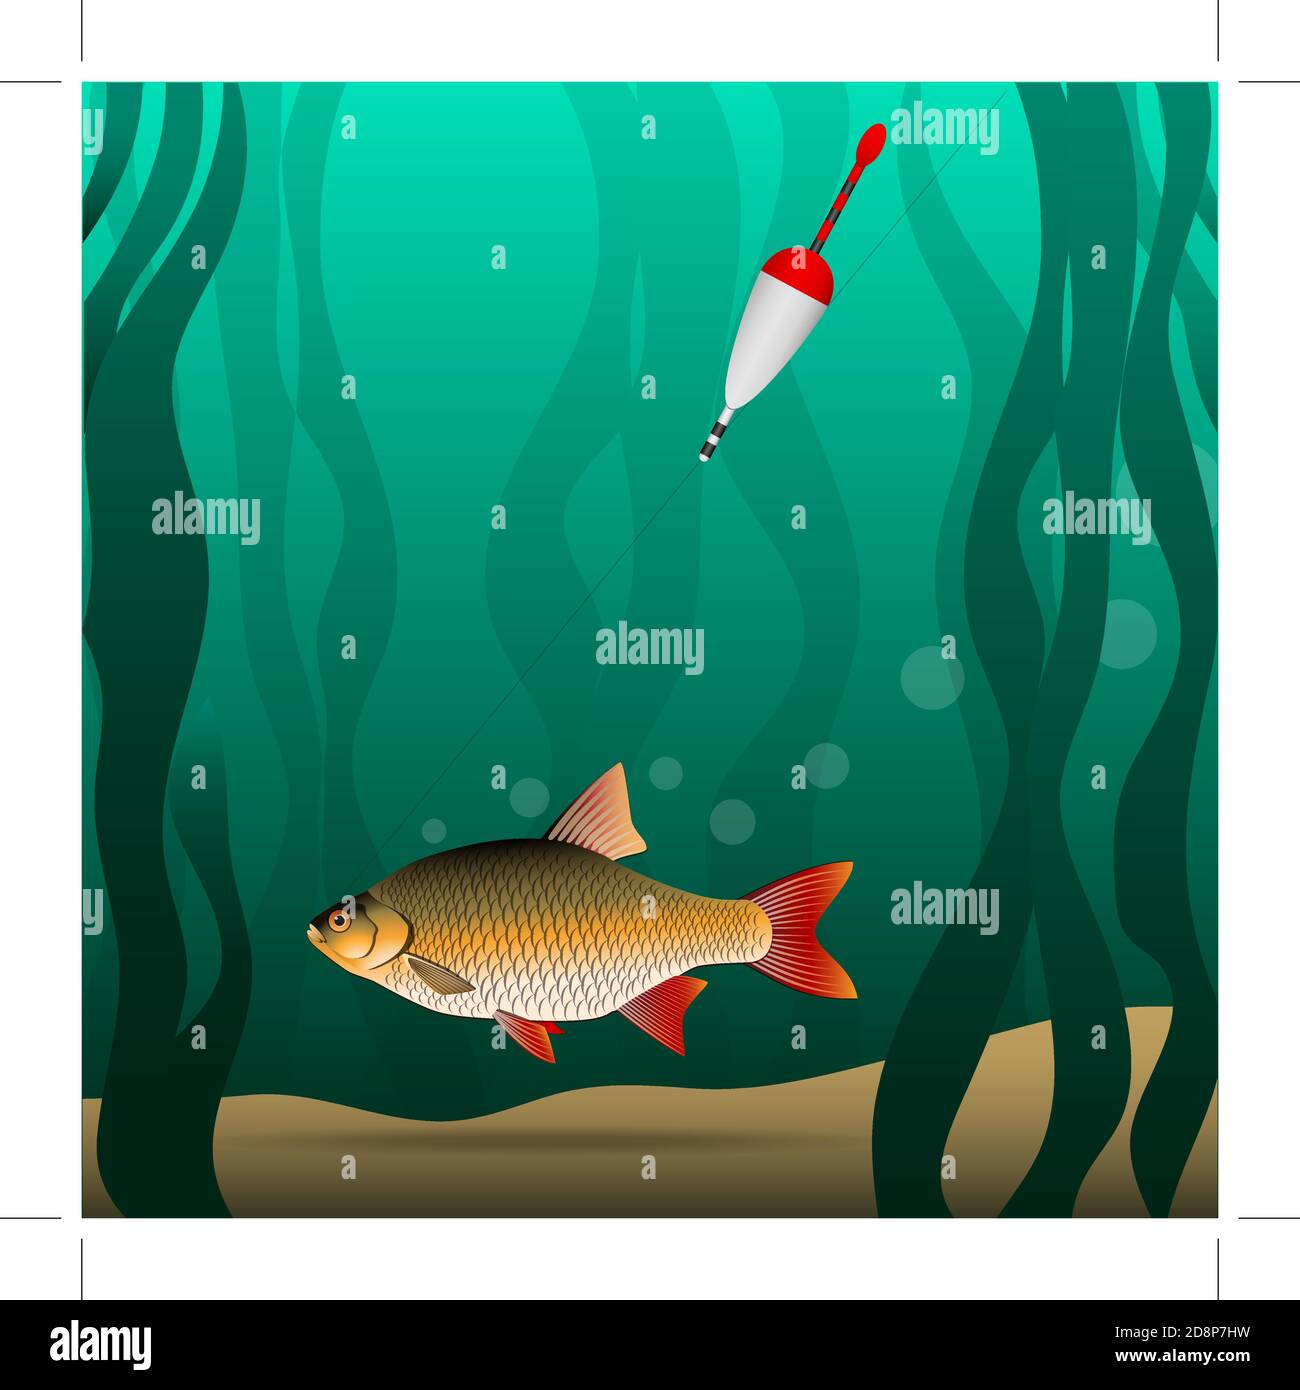 Carp fishing tackle Stock Vector Images - Alamy